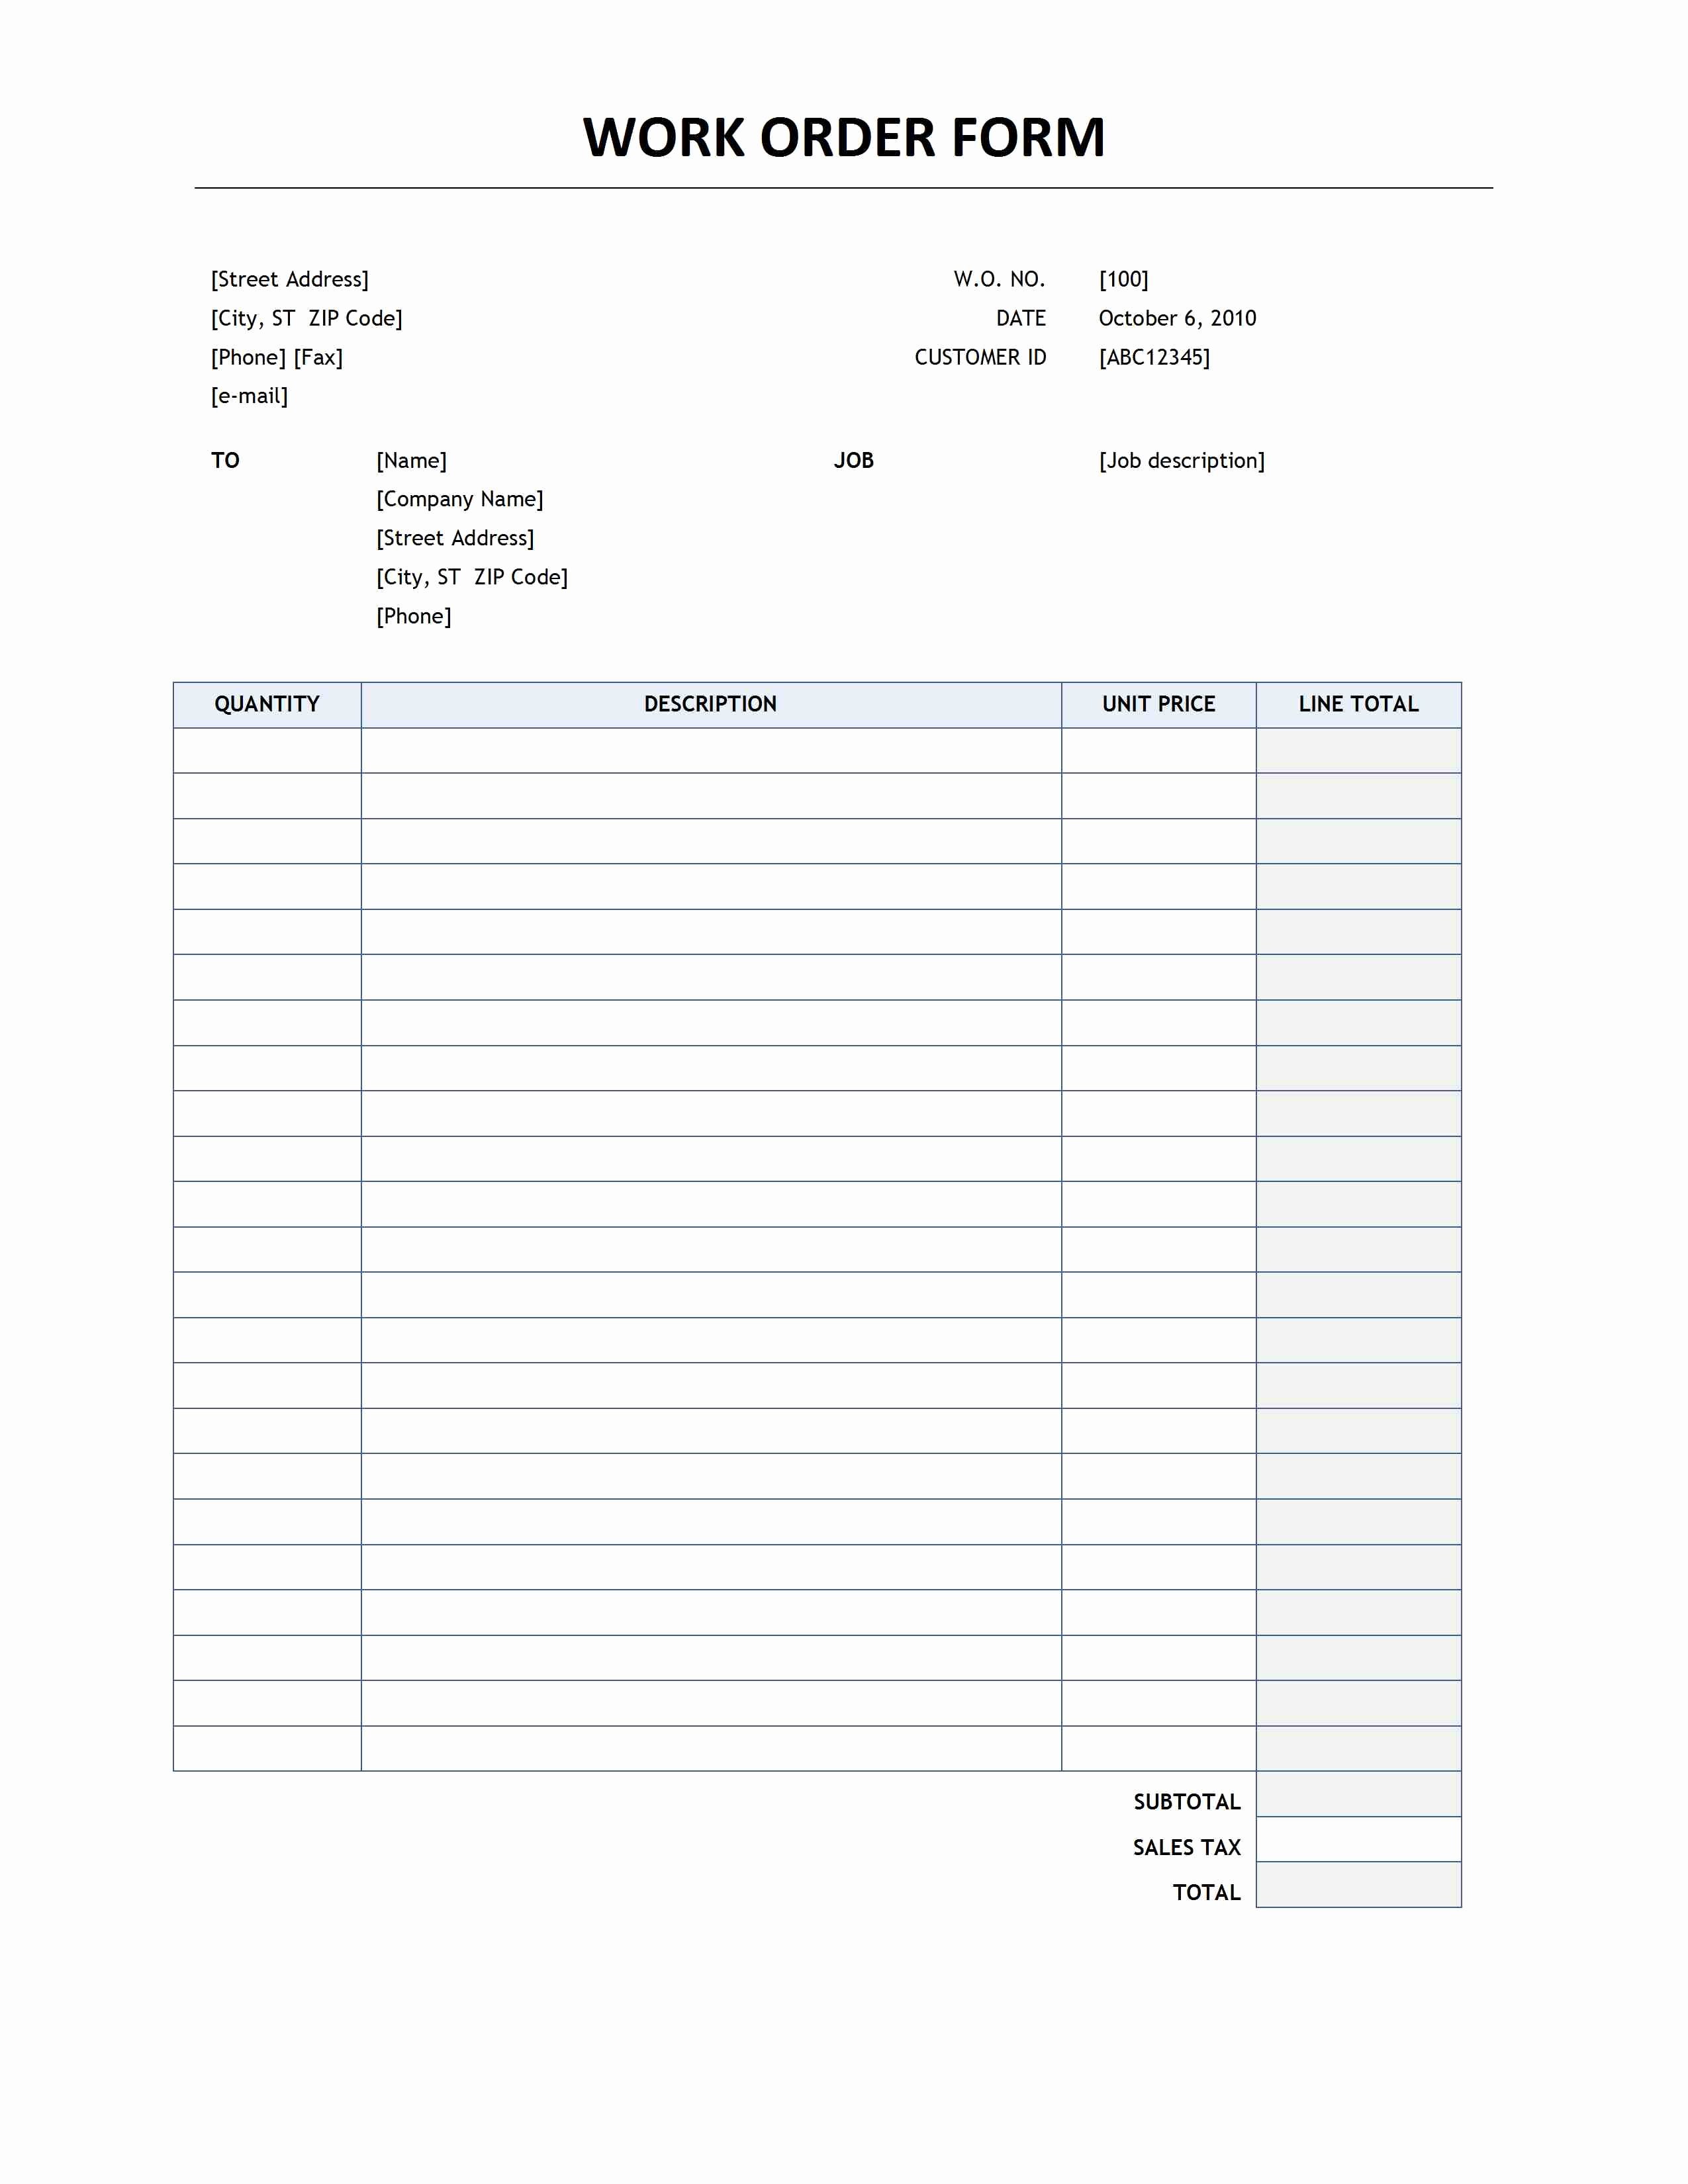 Work order form Template